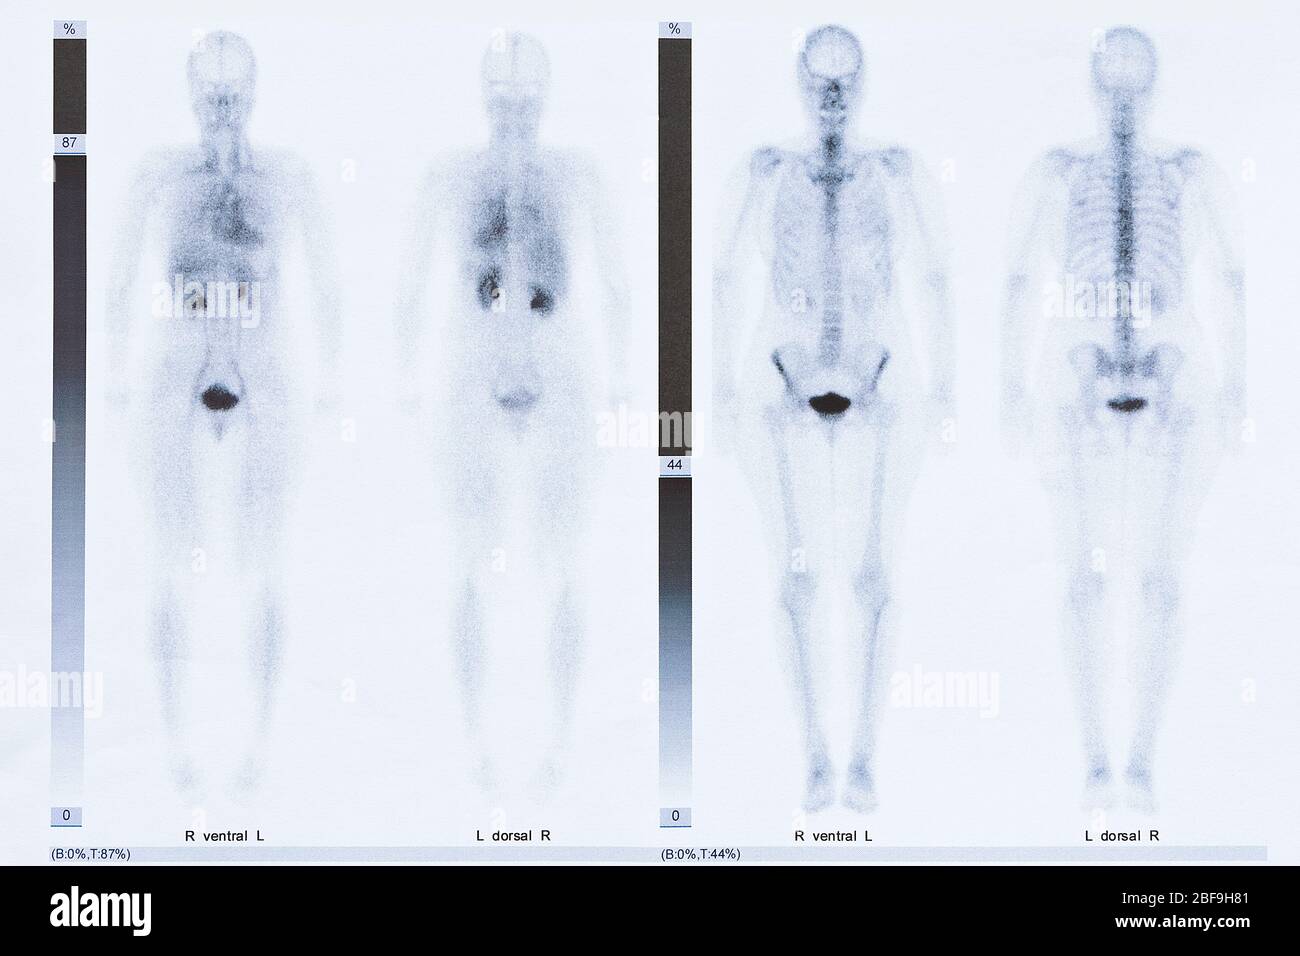 https://c8.alamy.com/comp/2BF9H81/bone-scintigraphy-or-scintigram-of-the-whole-body-of-a-50-year-old-woman-showing-arthrosis-at-the-thoracic-spine-2BF9H81.jpg